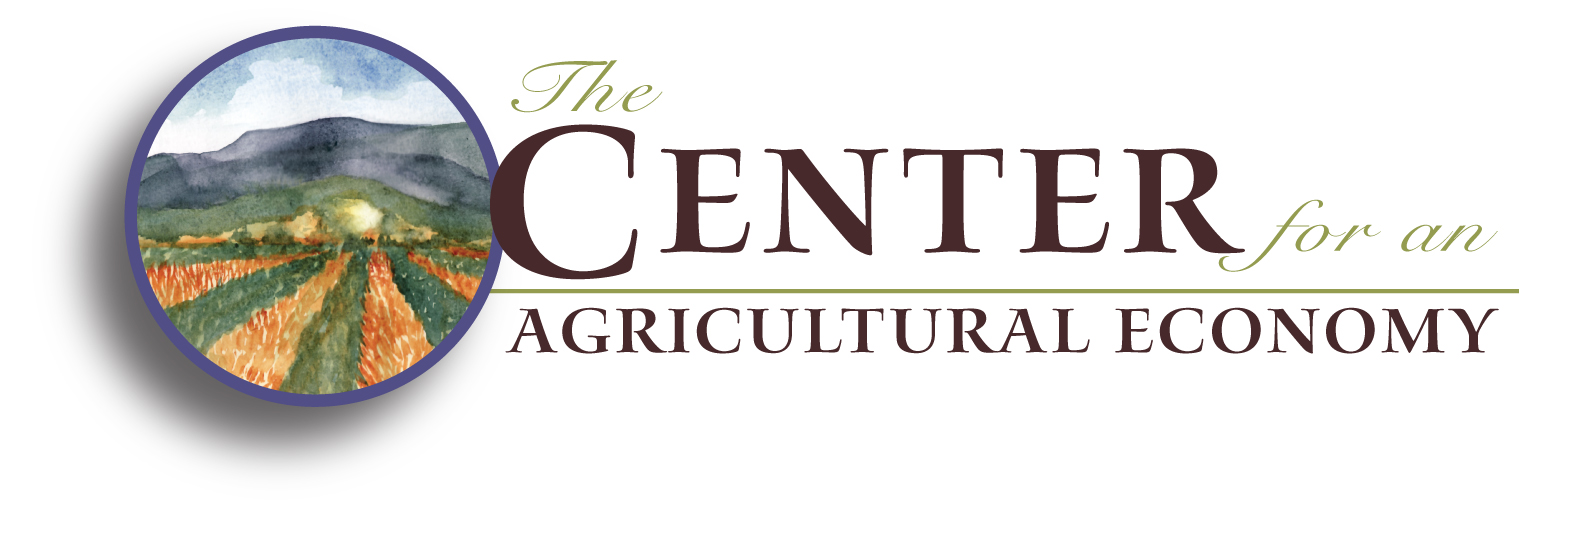 The Center for an Agricultural Economy